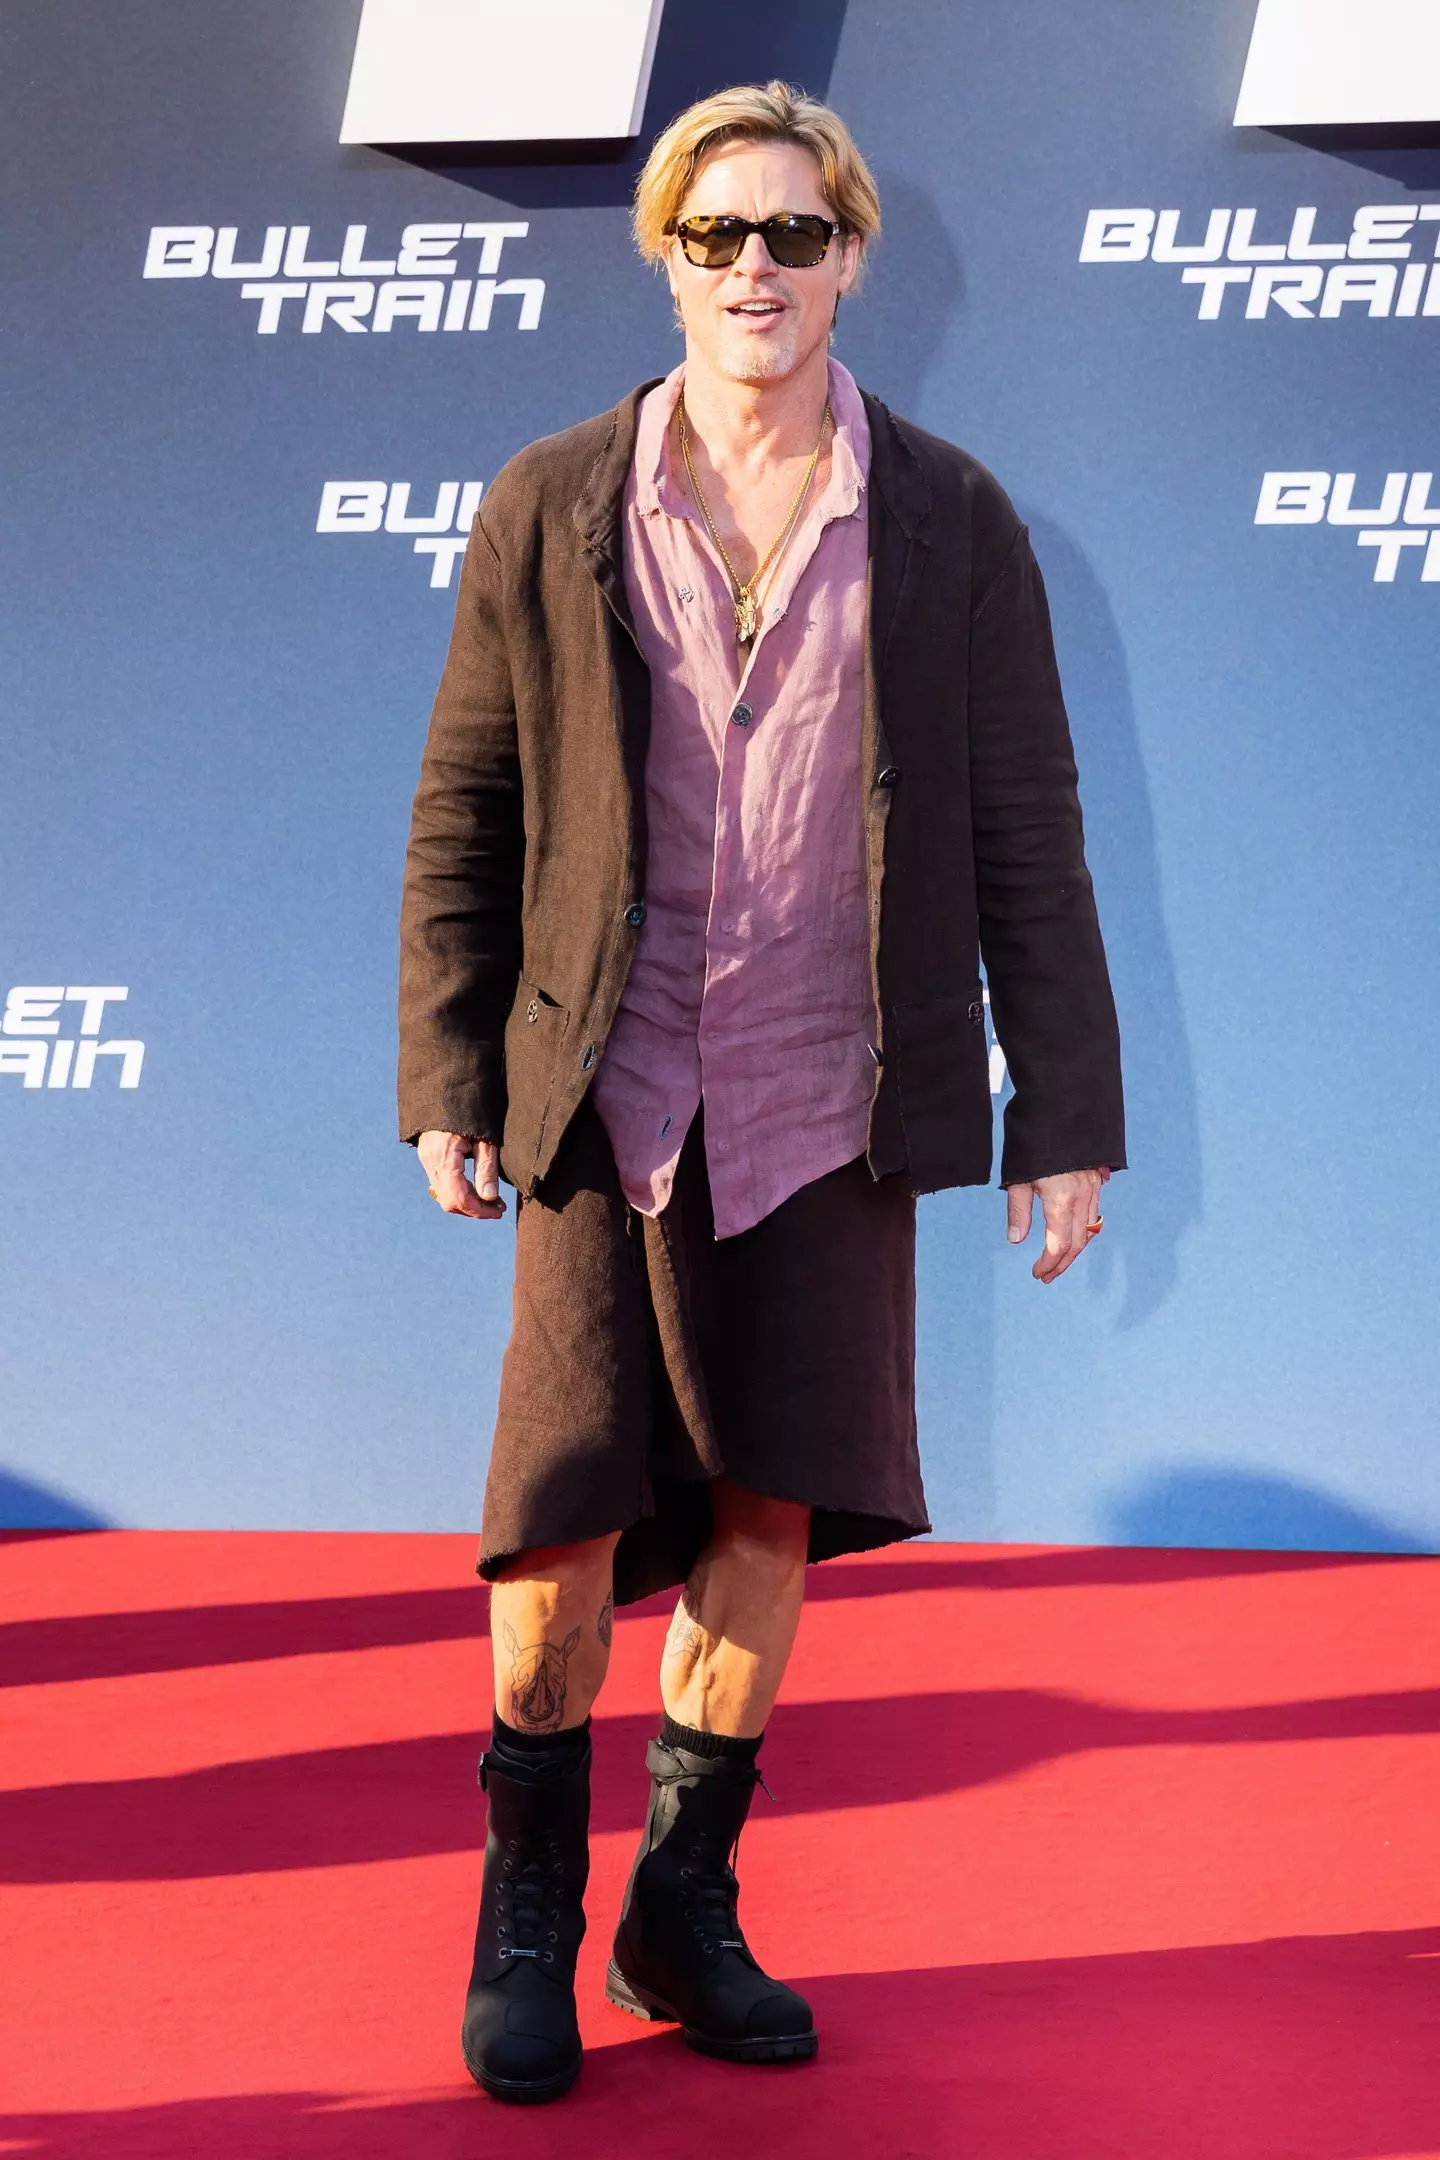 Brad Pitt at the German premiere for Bullet Train.